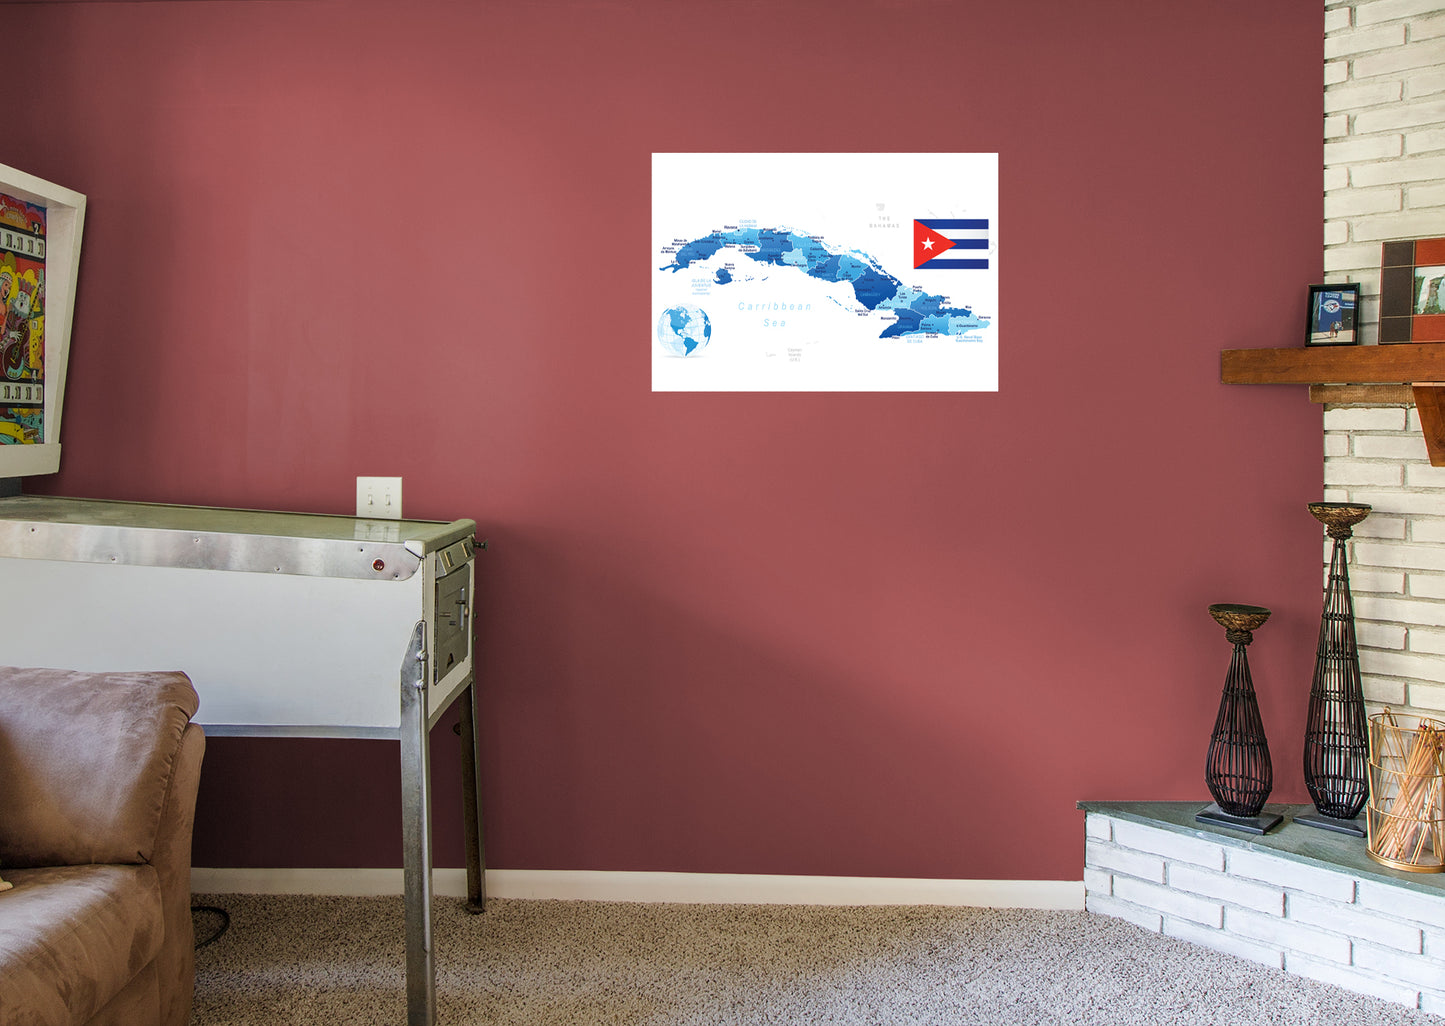 Maps of North America: Cuba Mural        -   Removable Wall   Adhesive Decal